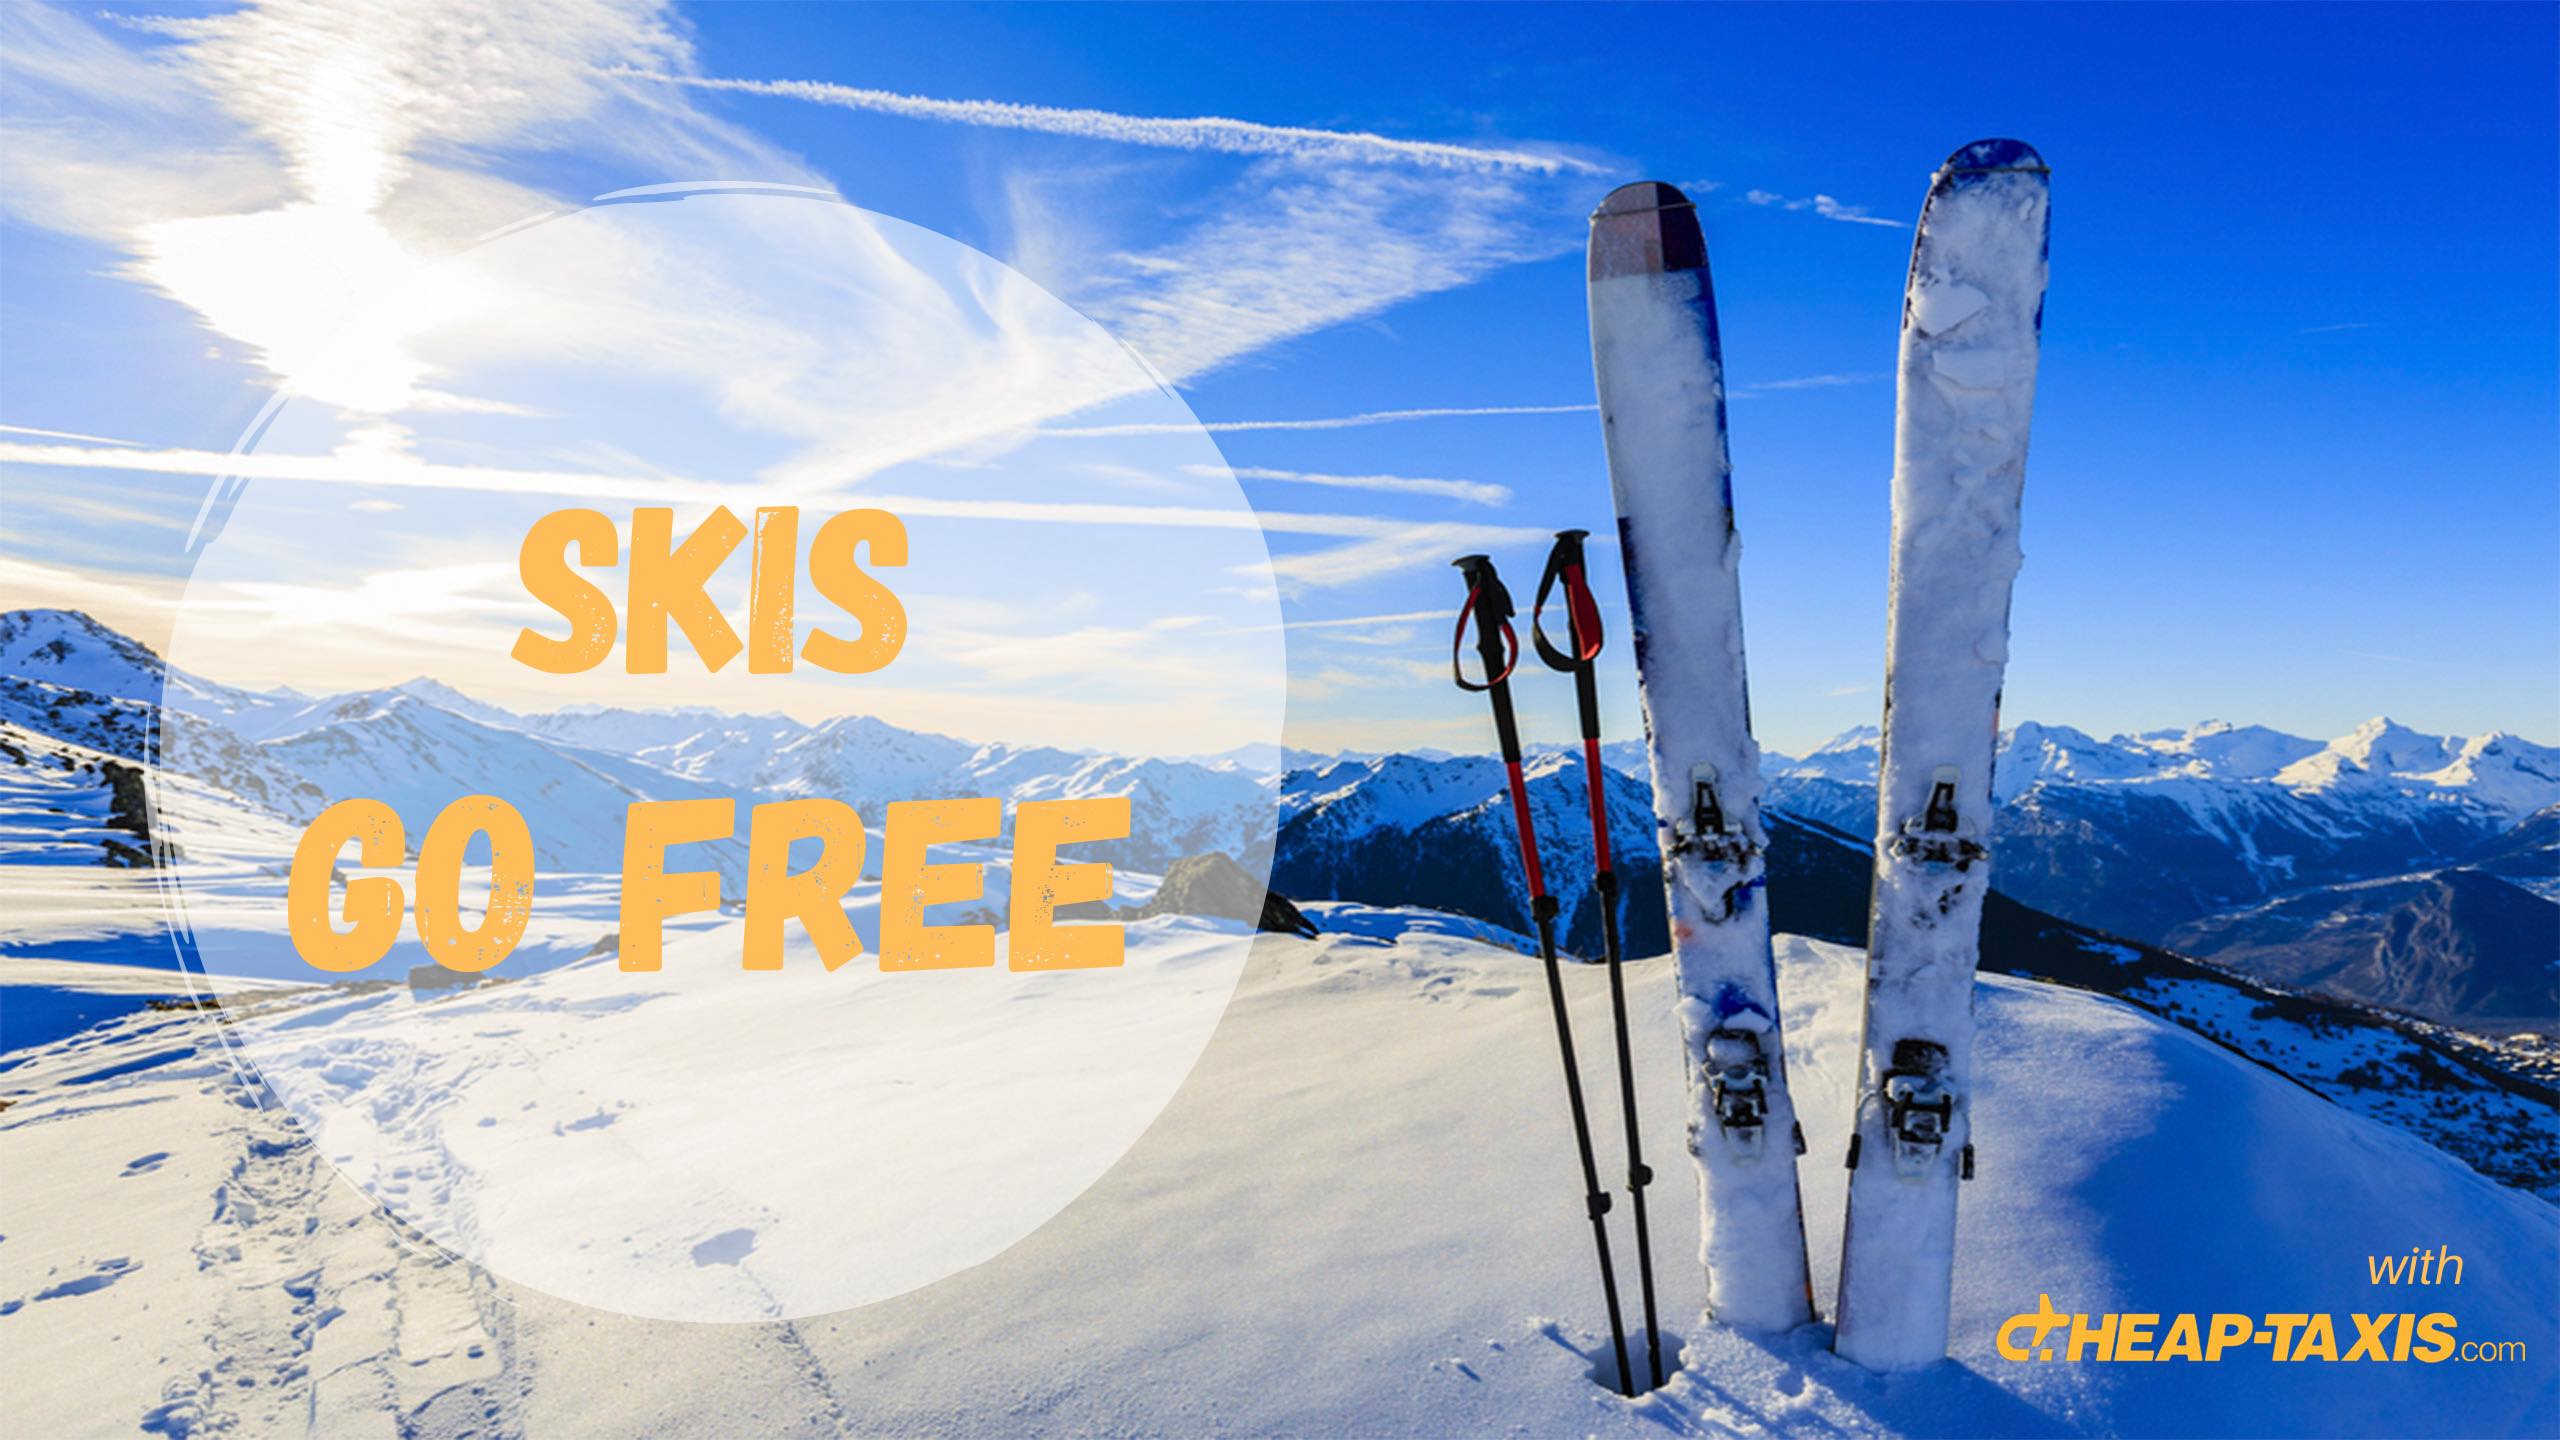 Ski travel free with our Turin transfers